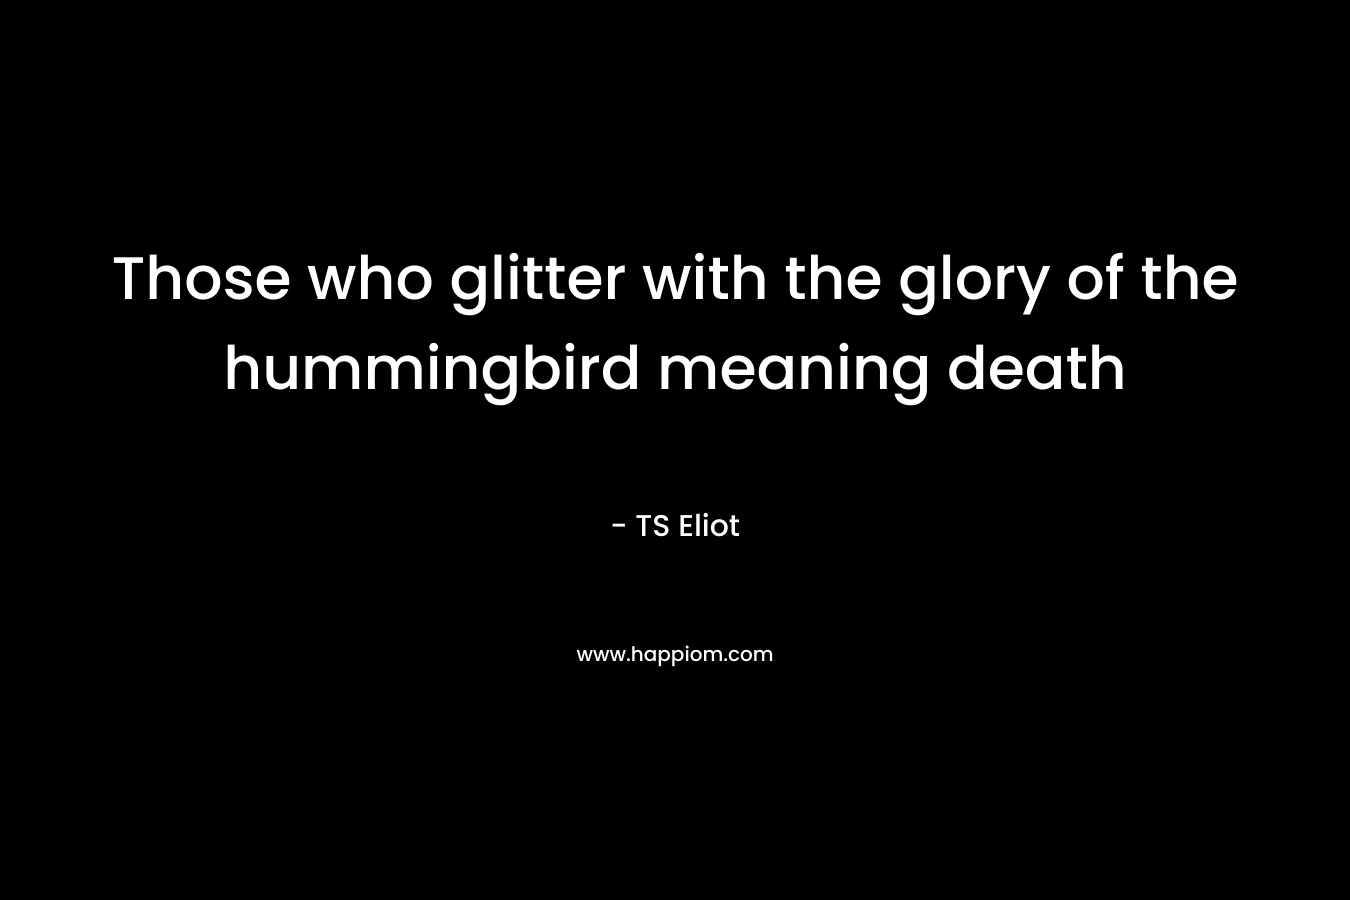 Those who glitter with the glory of the hummingbird meaning death – TS Eliot